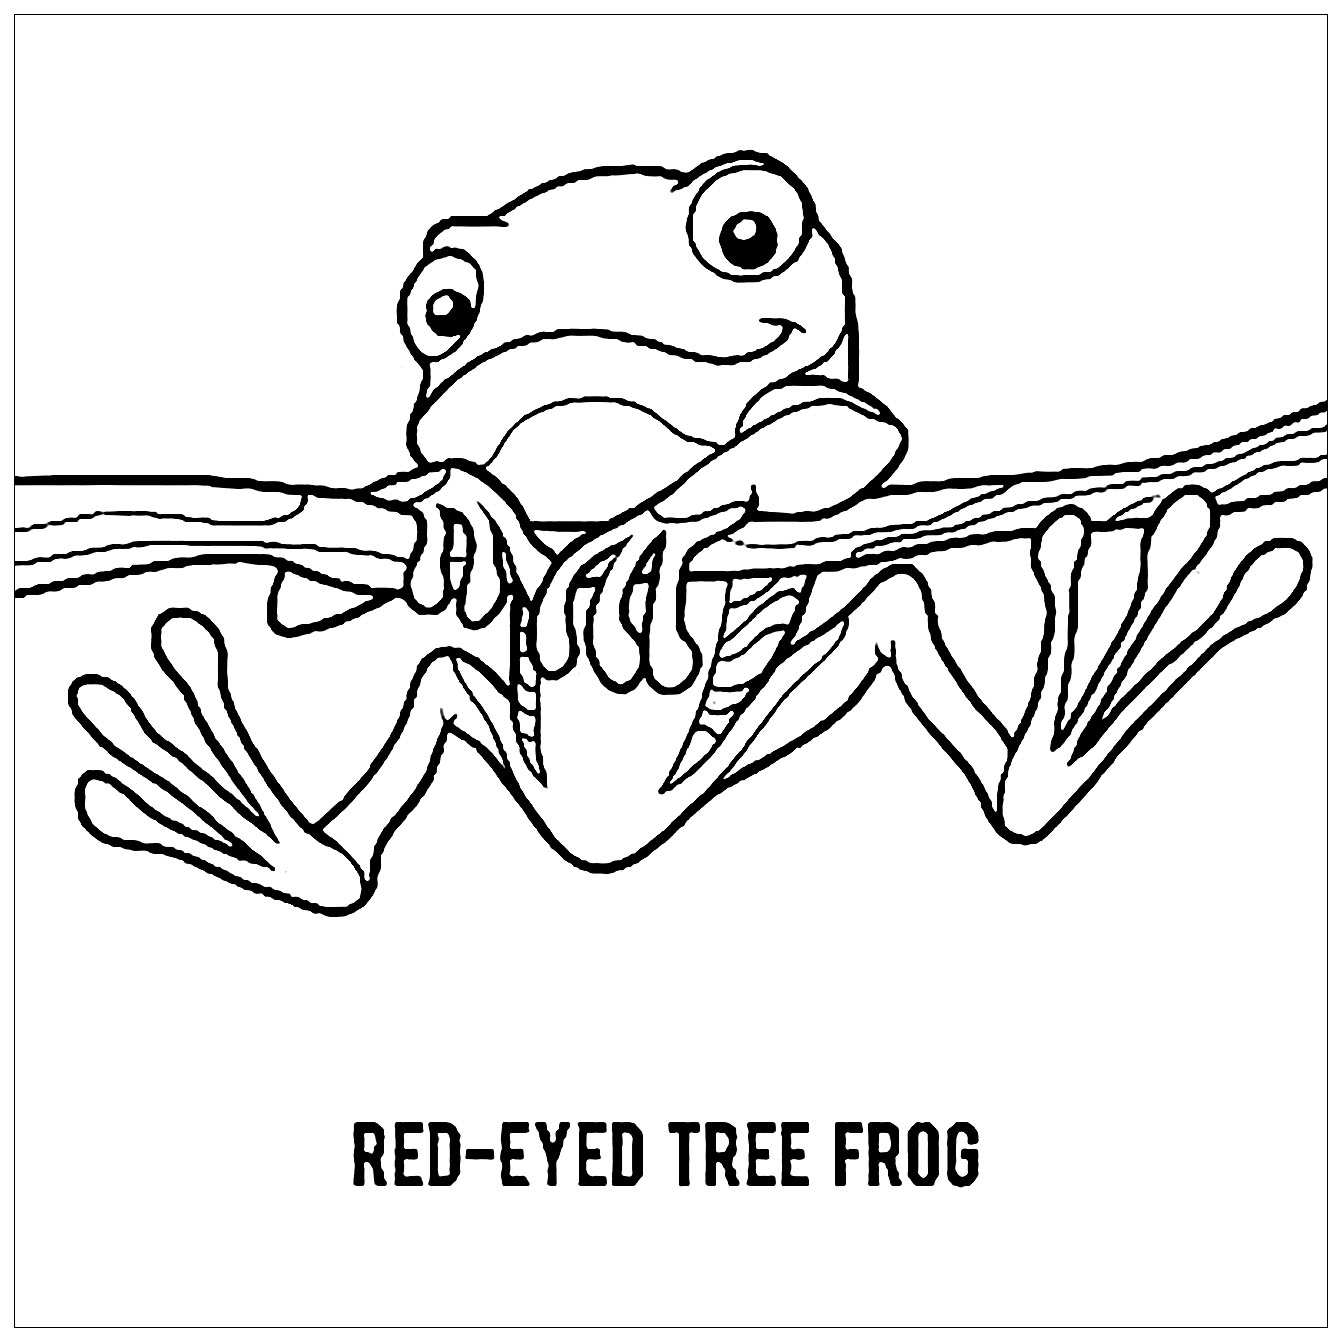 Frog image to print and color